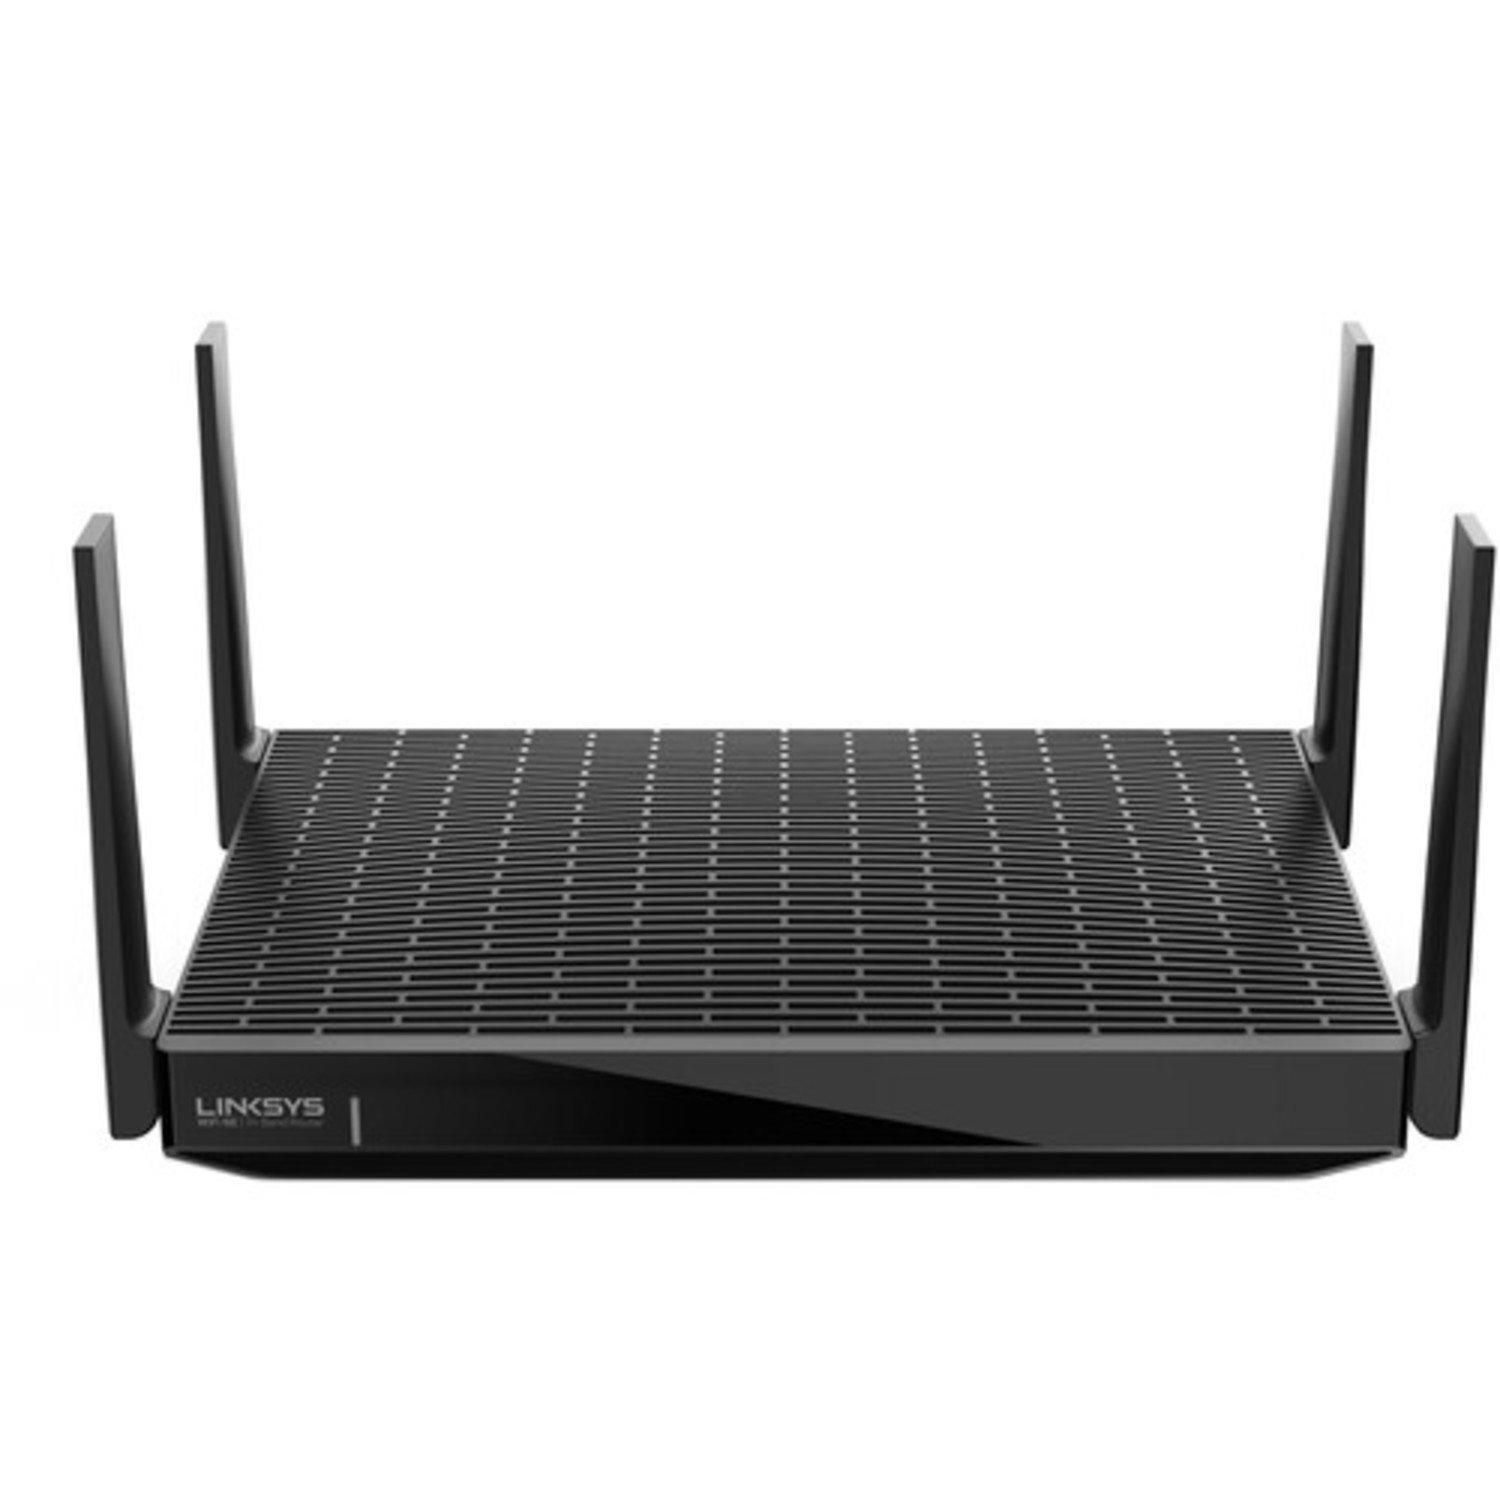 list item 1 of 14 Linksys Hydra Pro AXE6600 Tri-Band Gigabit Wi-Fi Gaming Router MR7500